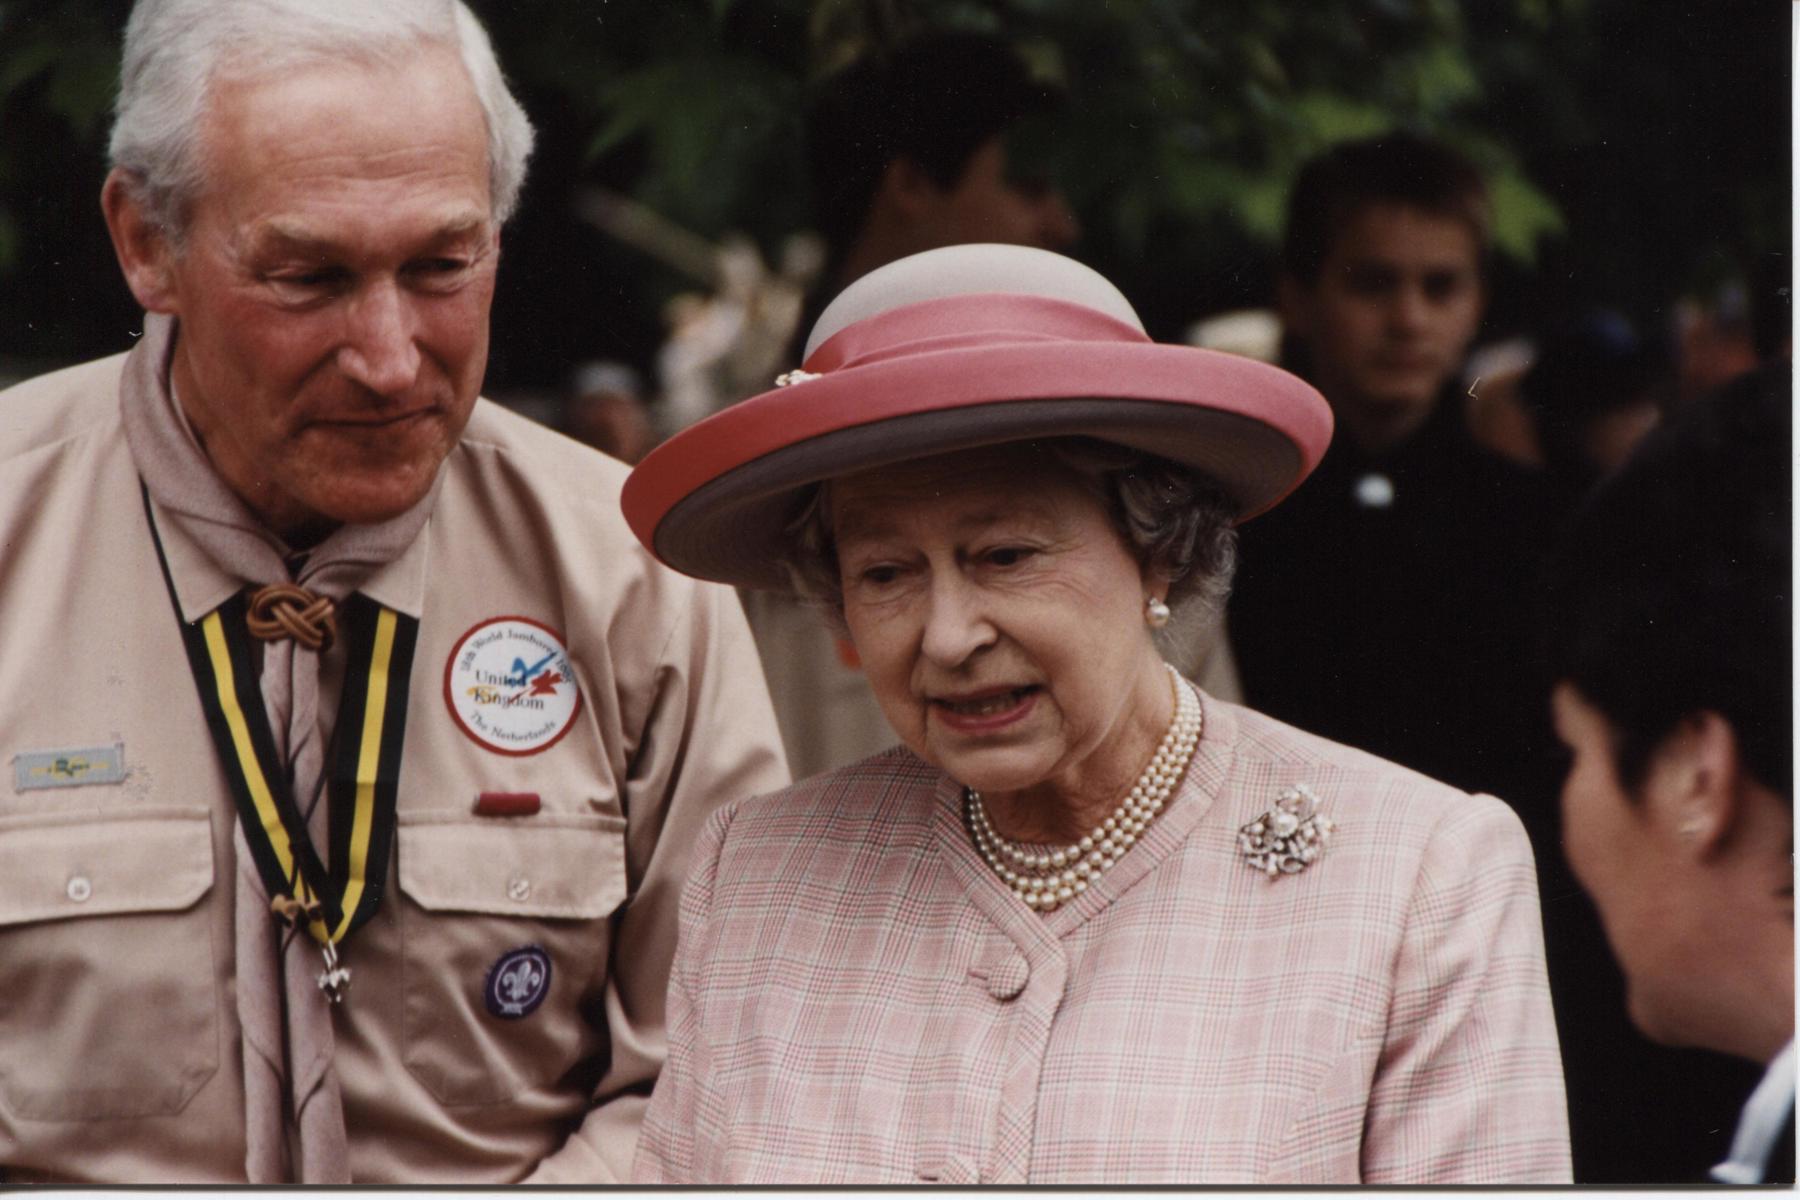 The Queen, wearing a pink hat, talks to a volunteer next to her.